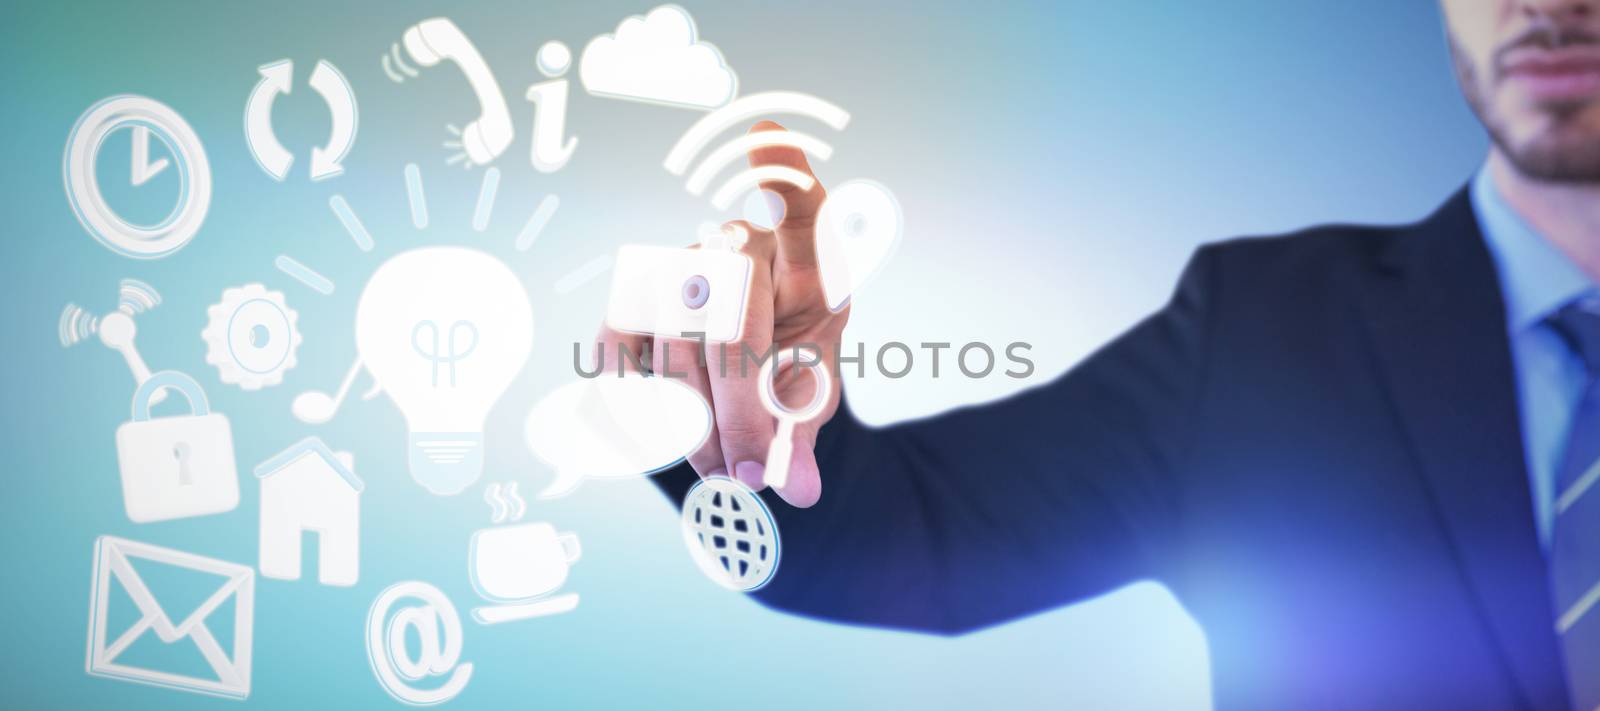 Composite image of cropped image of businessman touching index finger on invisible screen by Wavebreakmedia